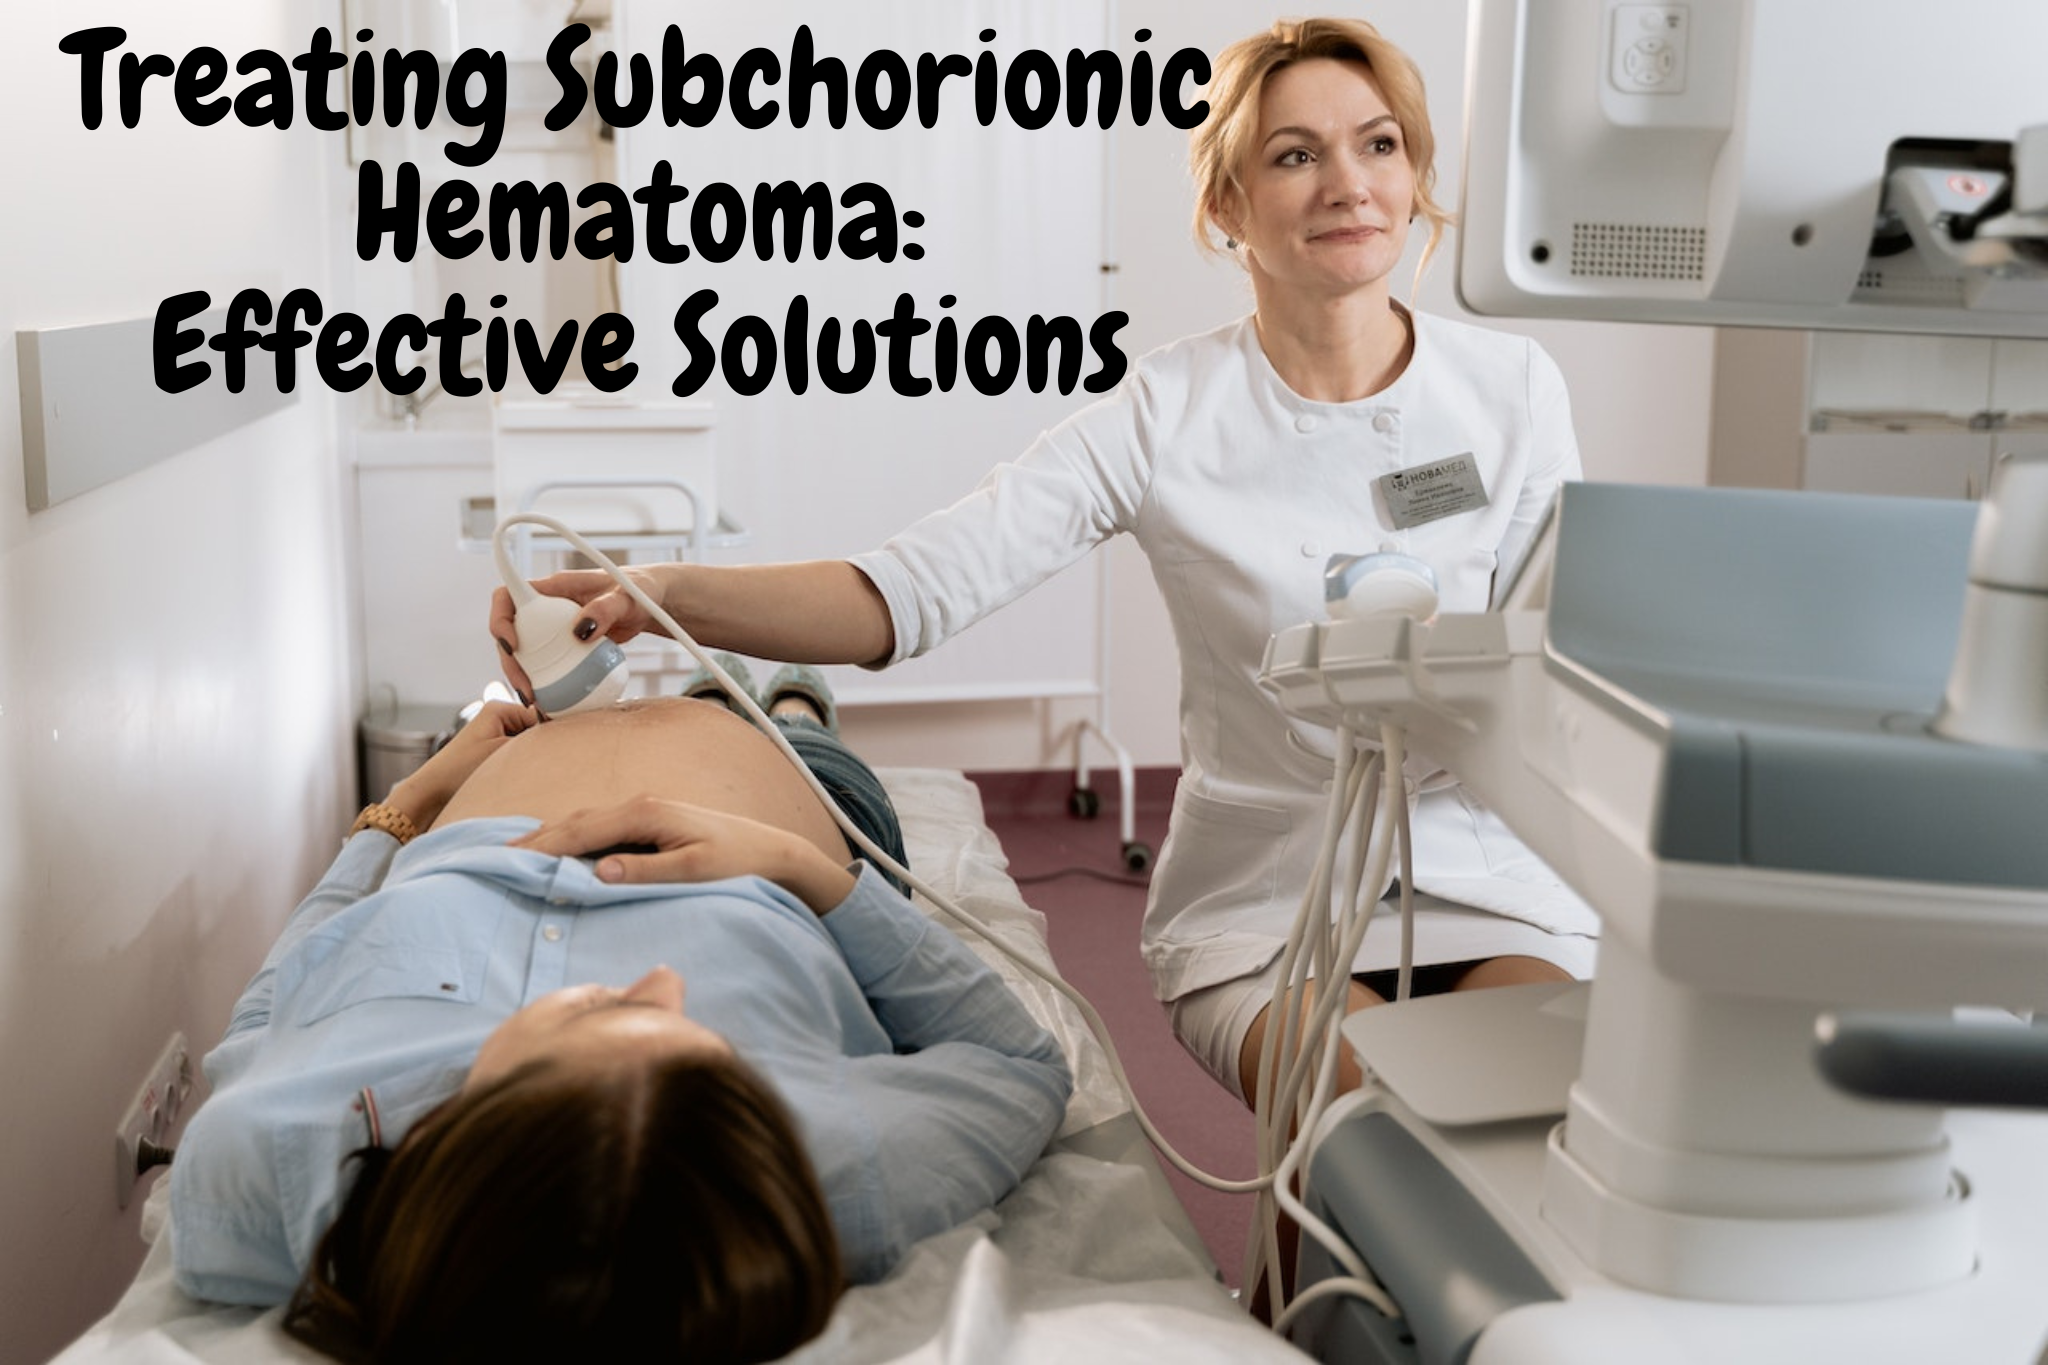 What are the symptoms of a subchorionic hematoma?